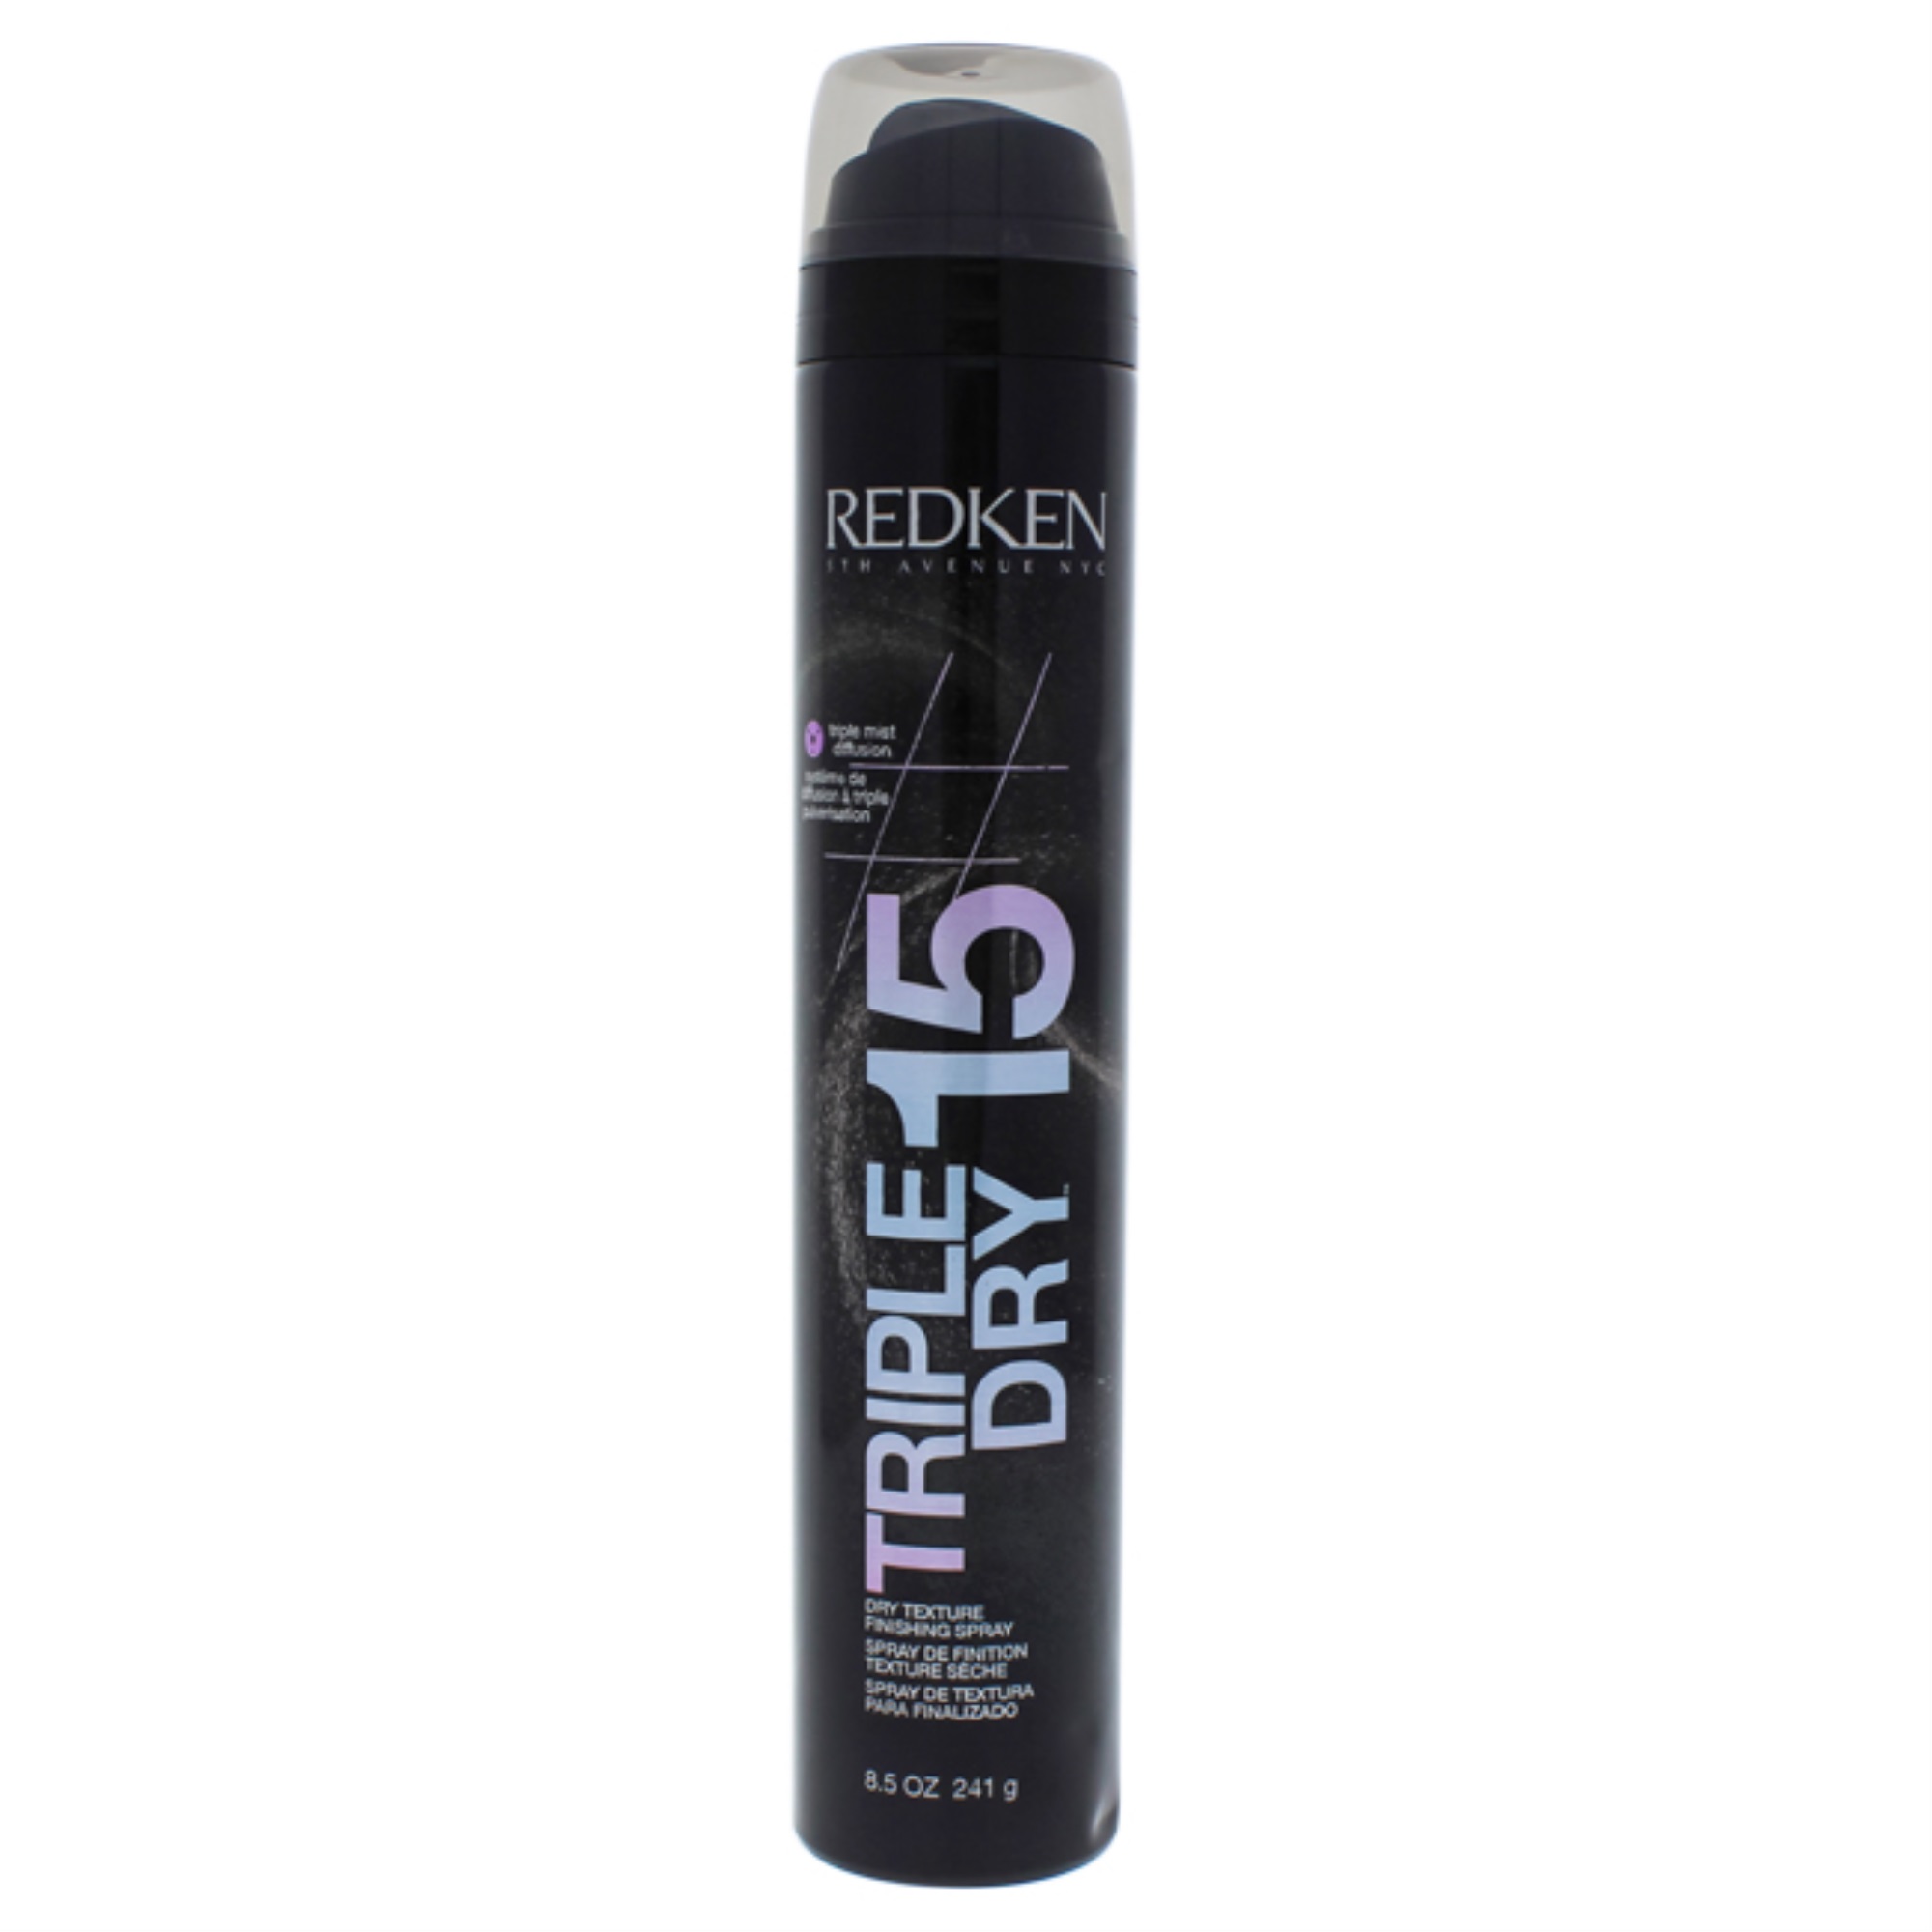 Triple Dry 15 Texture Finishing Spray by Redken for Unisex - 8.5 oz